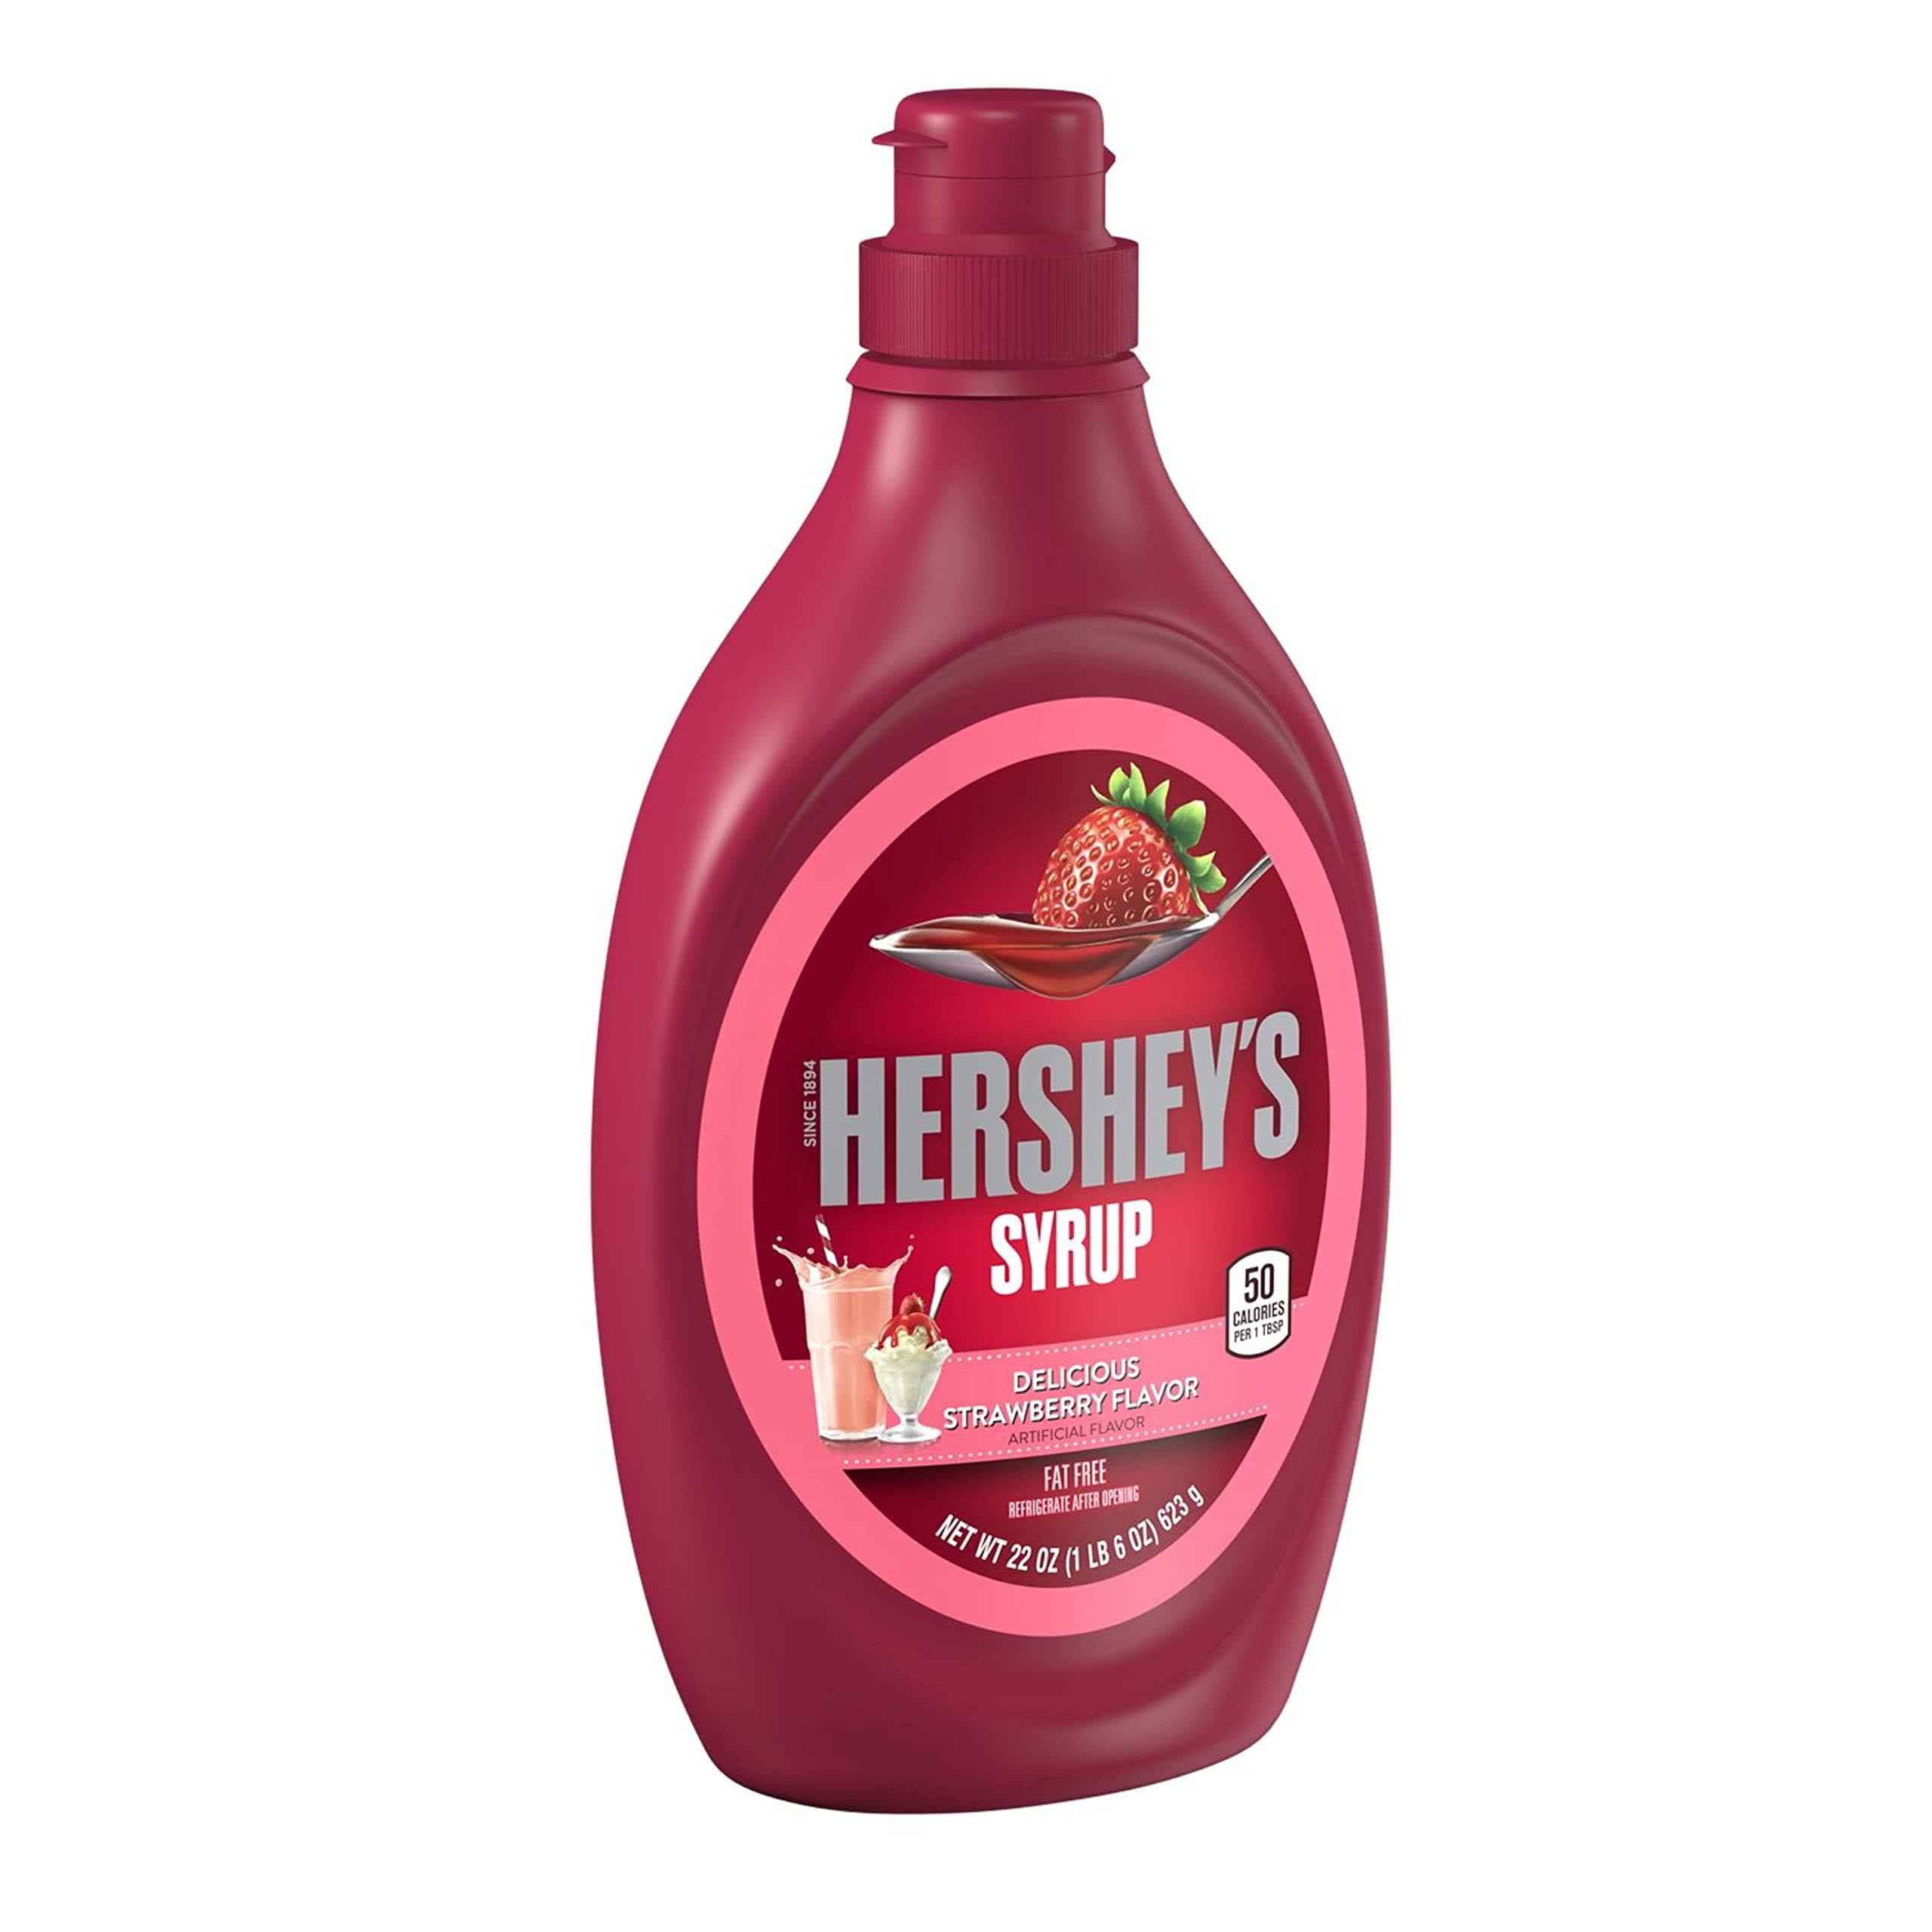 Hershey's Delicious Syrup - Strawberry Flavor, 22oz